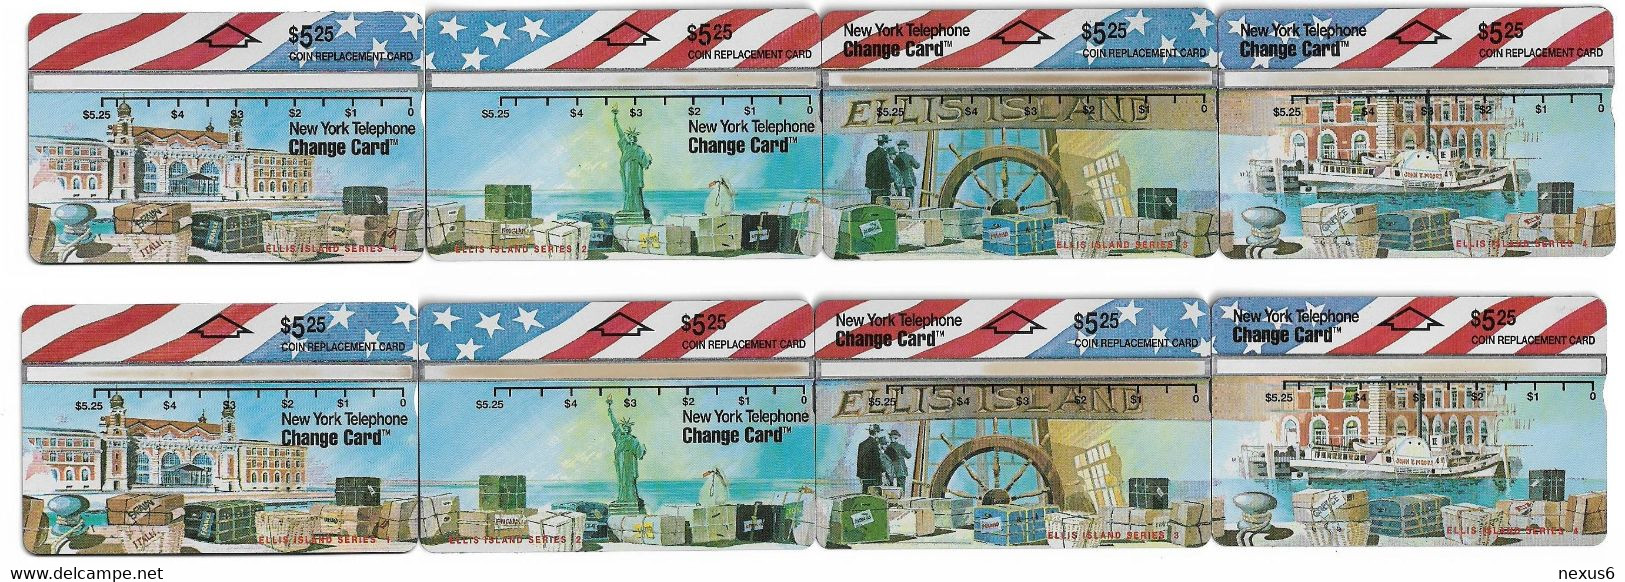 USA - Nynex (L&G) - 2 Full Puzzle Sets Ellis Island (ALL Batch Numbers), 1993, 5.25$, All Mint - Schede Olografiche (Landis & Gyr)